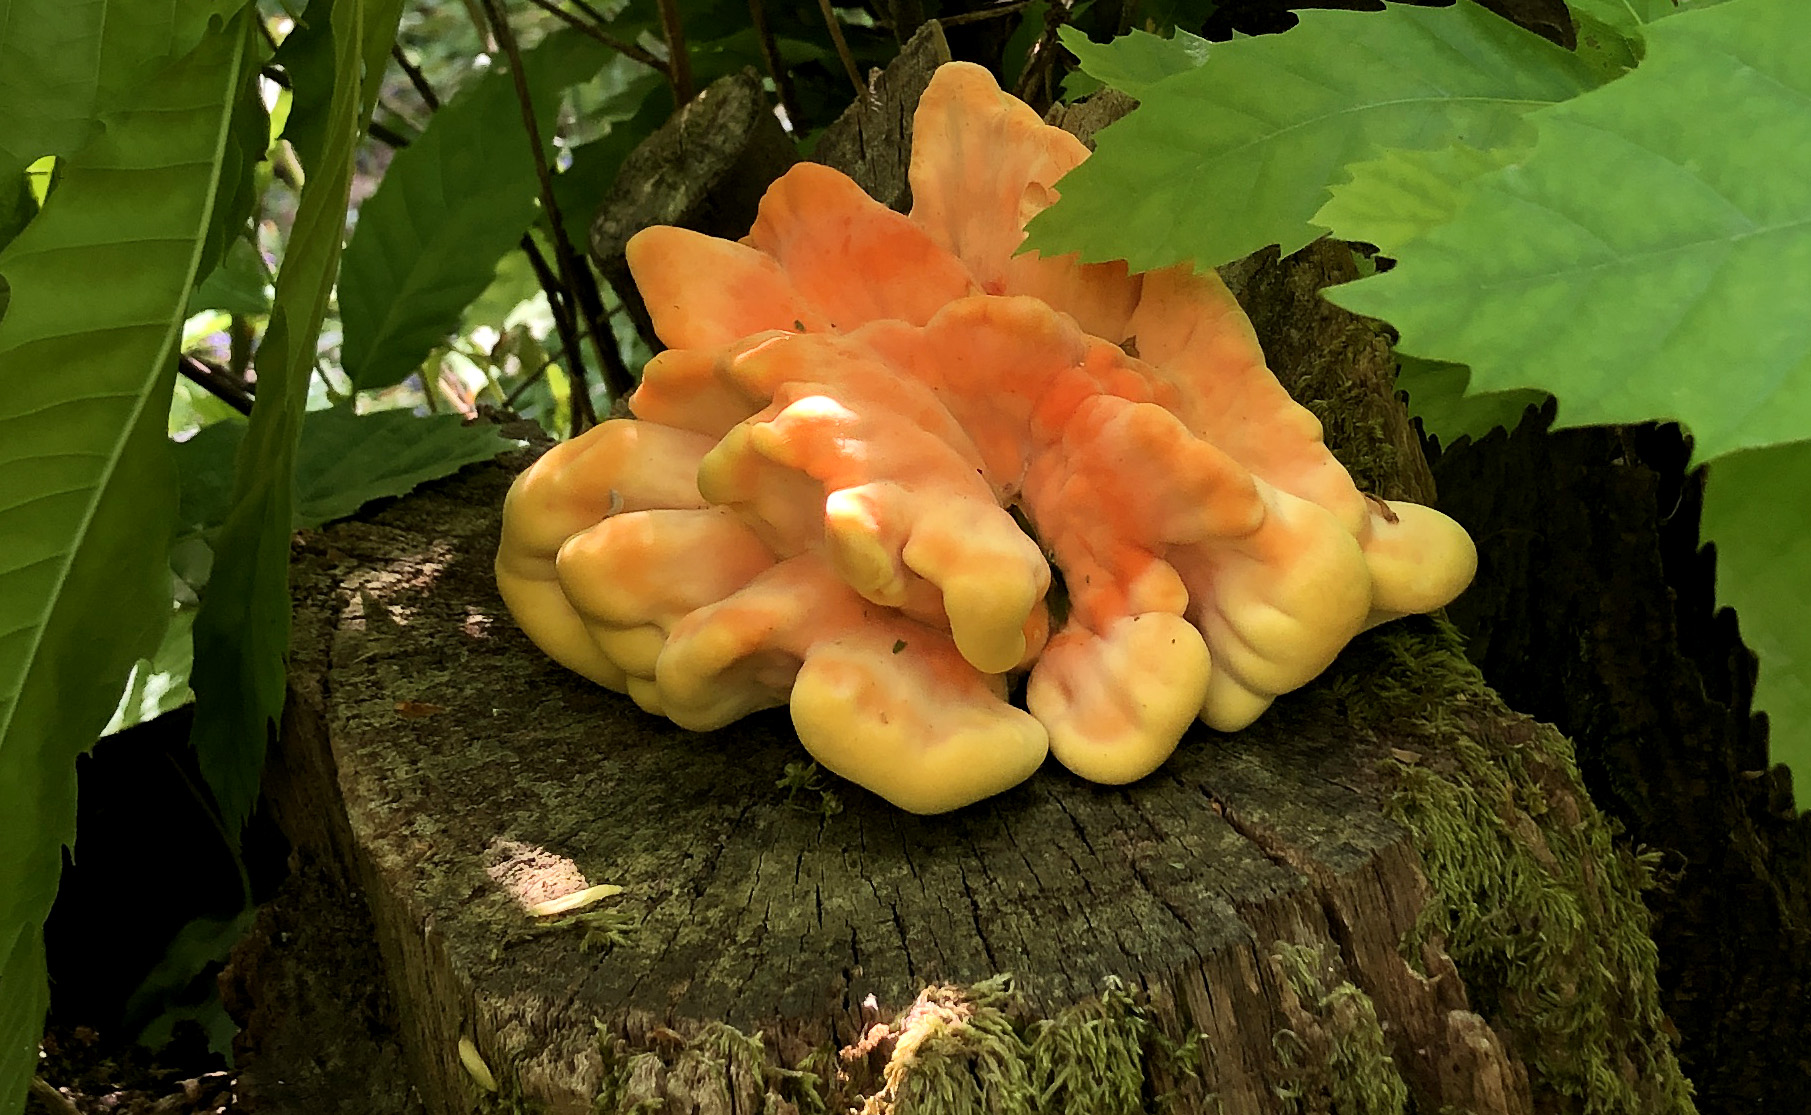 The plump, bright-orange folds of a 'Chicken of the woods' fungus grow on a weathered wooden stump.